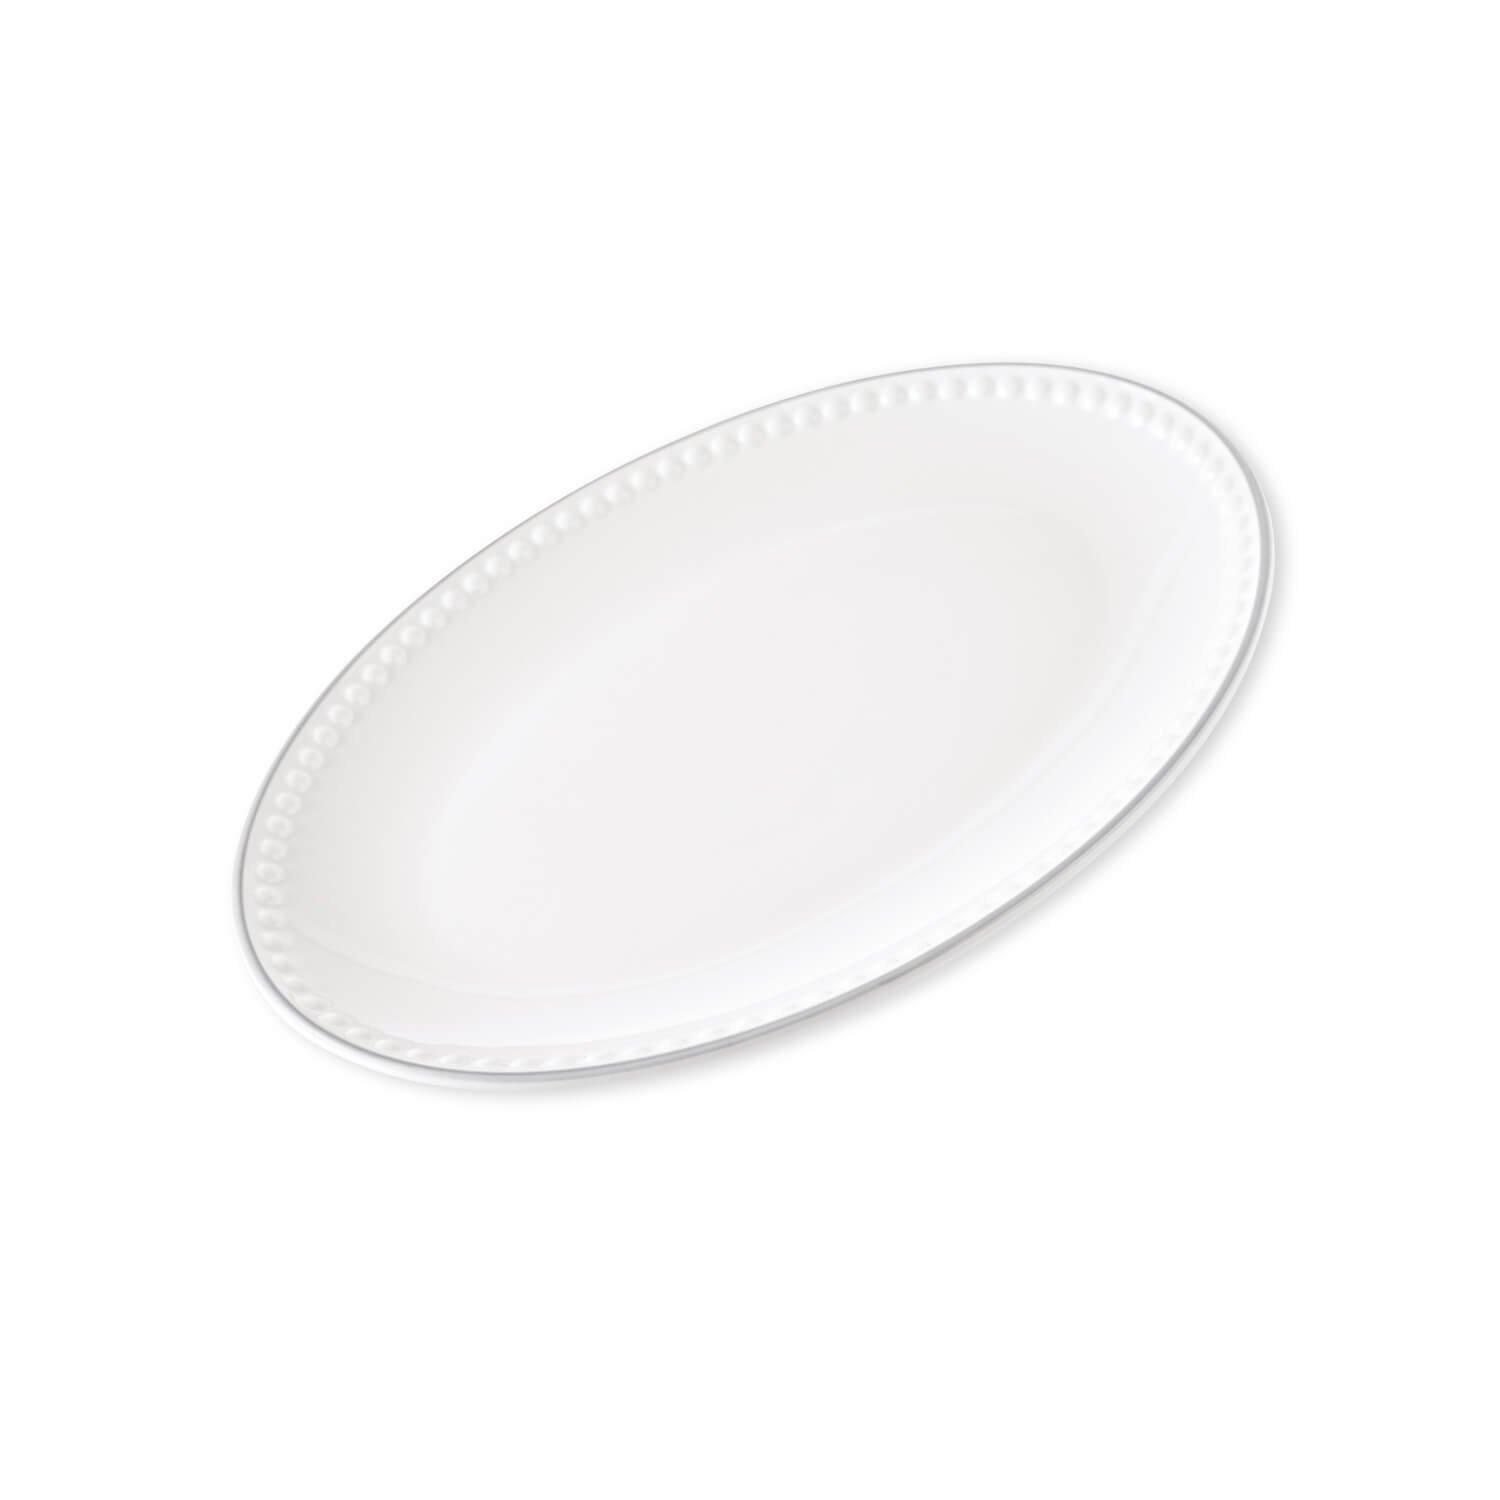 SIGNATURE COLLECTION SMALL OVAL PLATTER 25.5cm